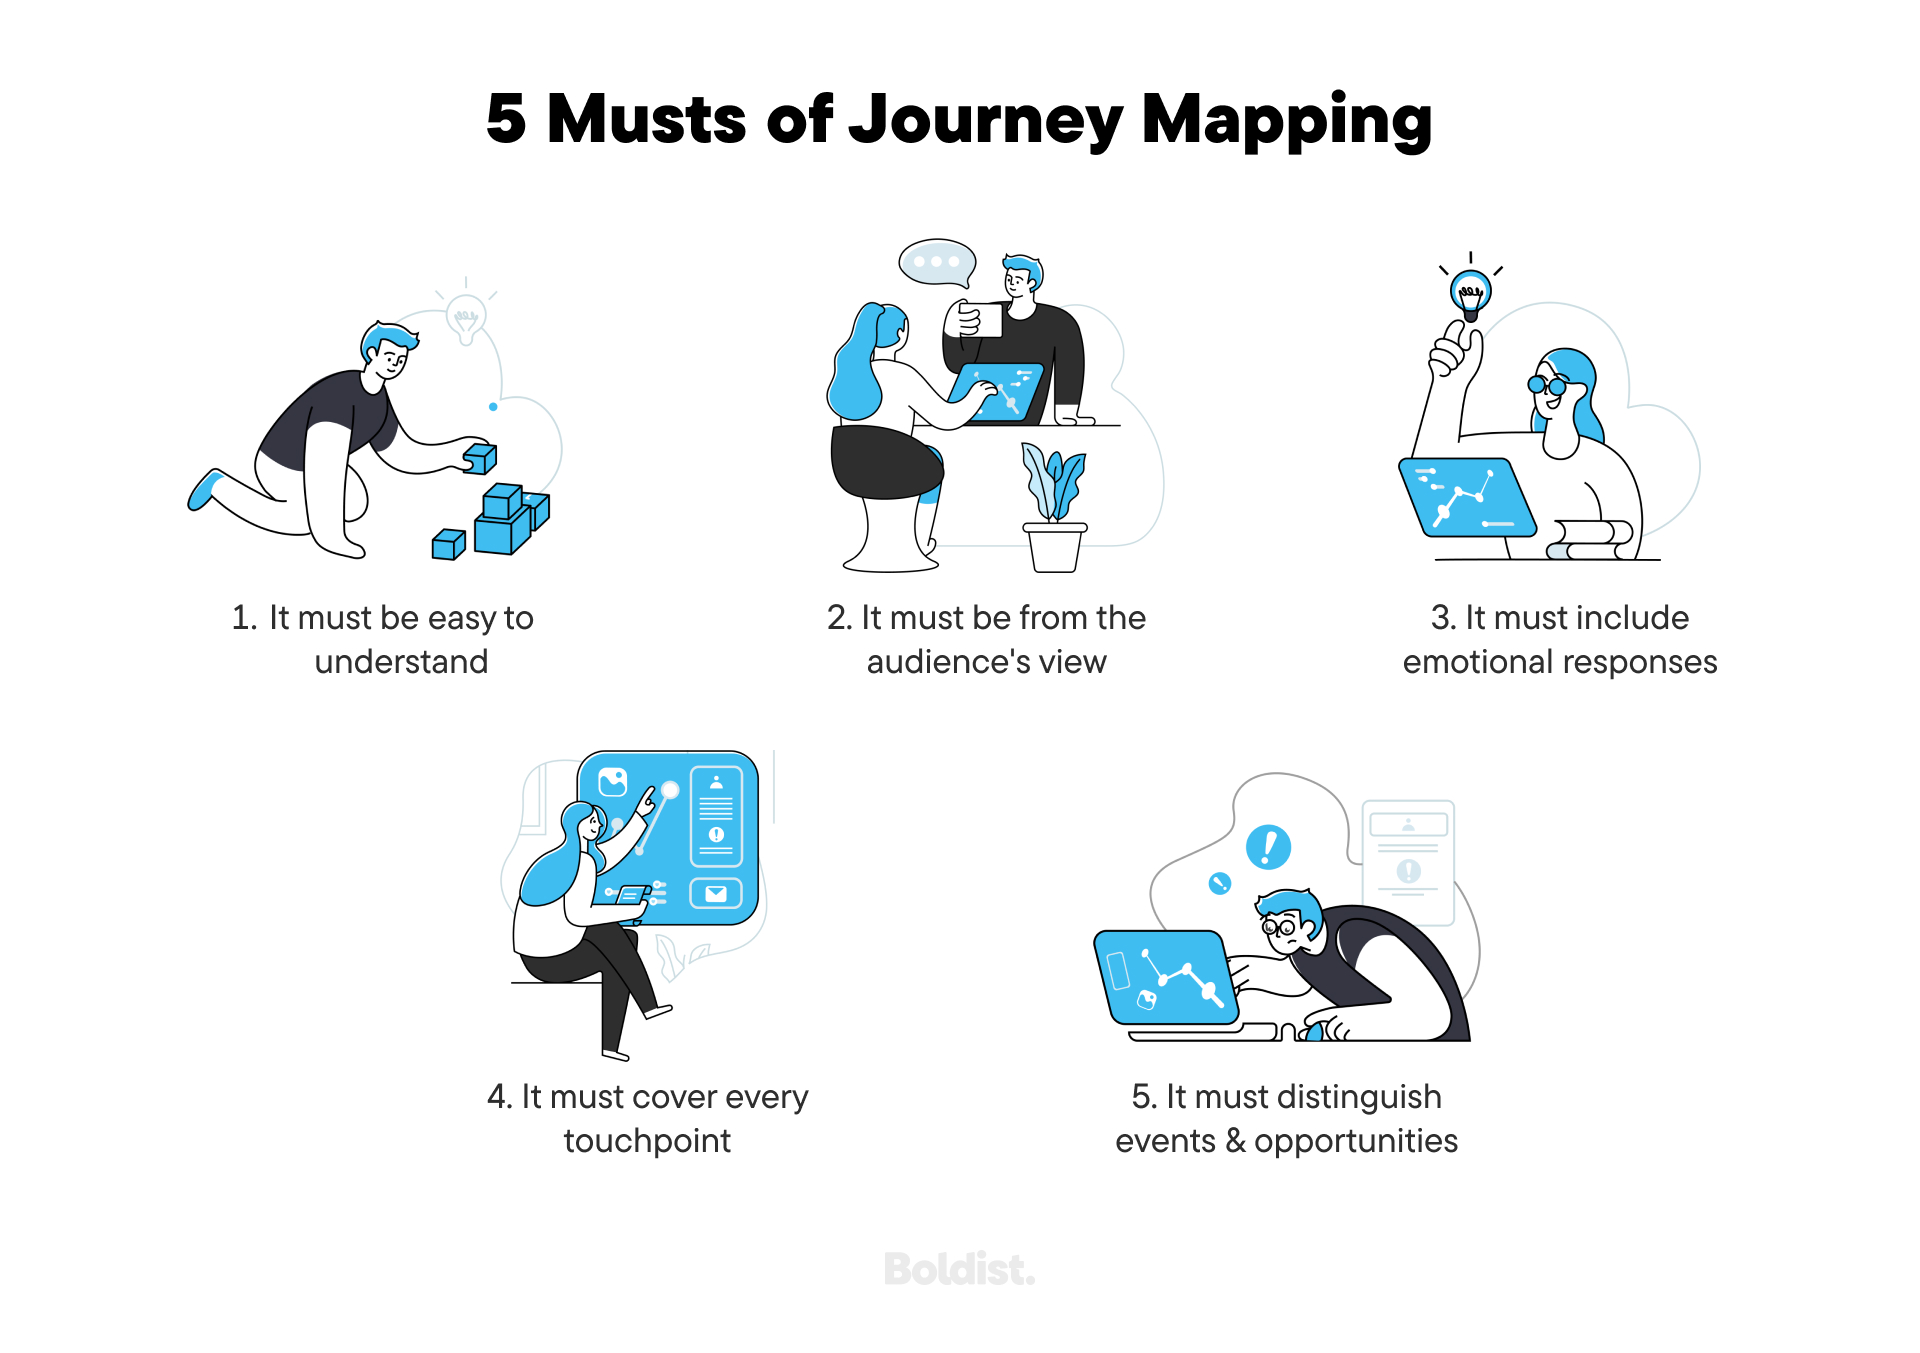 The 5 customer journey map musts from the article